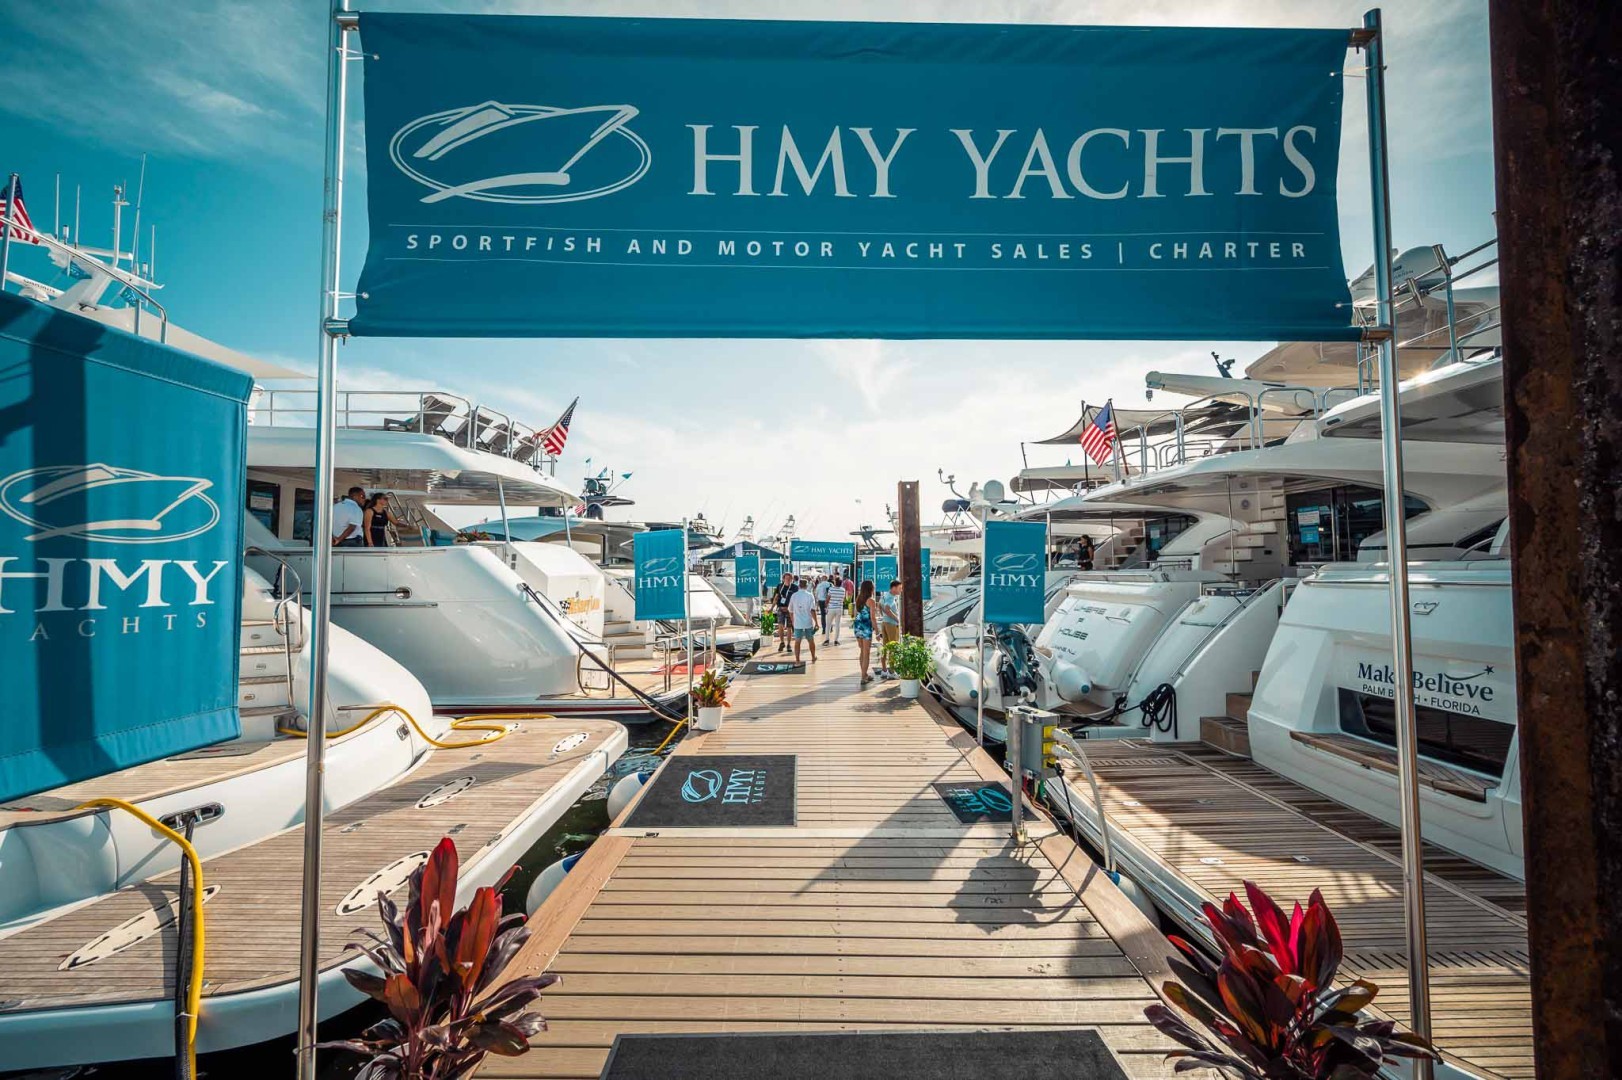 CentounoNavi lands in the USA with HMY Yacht Sales